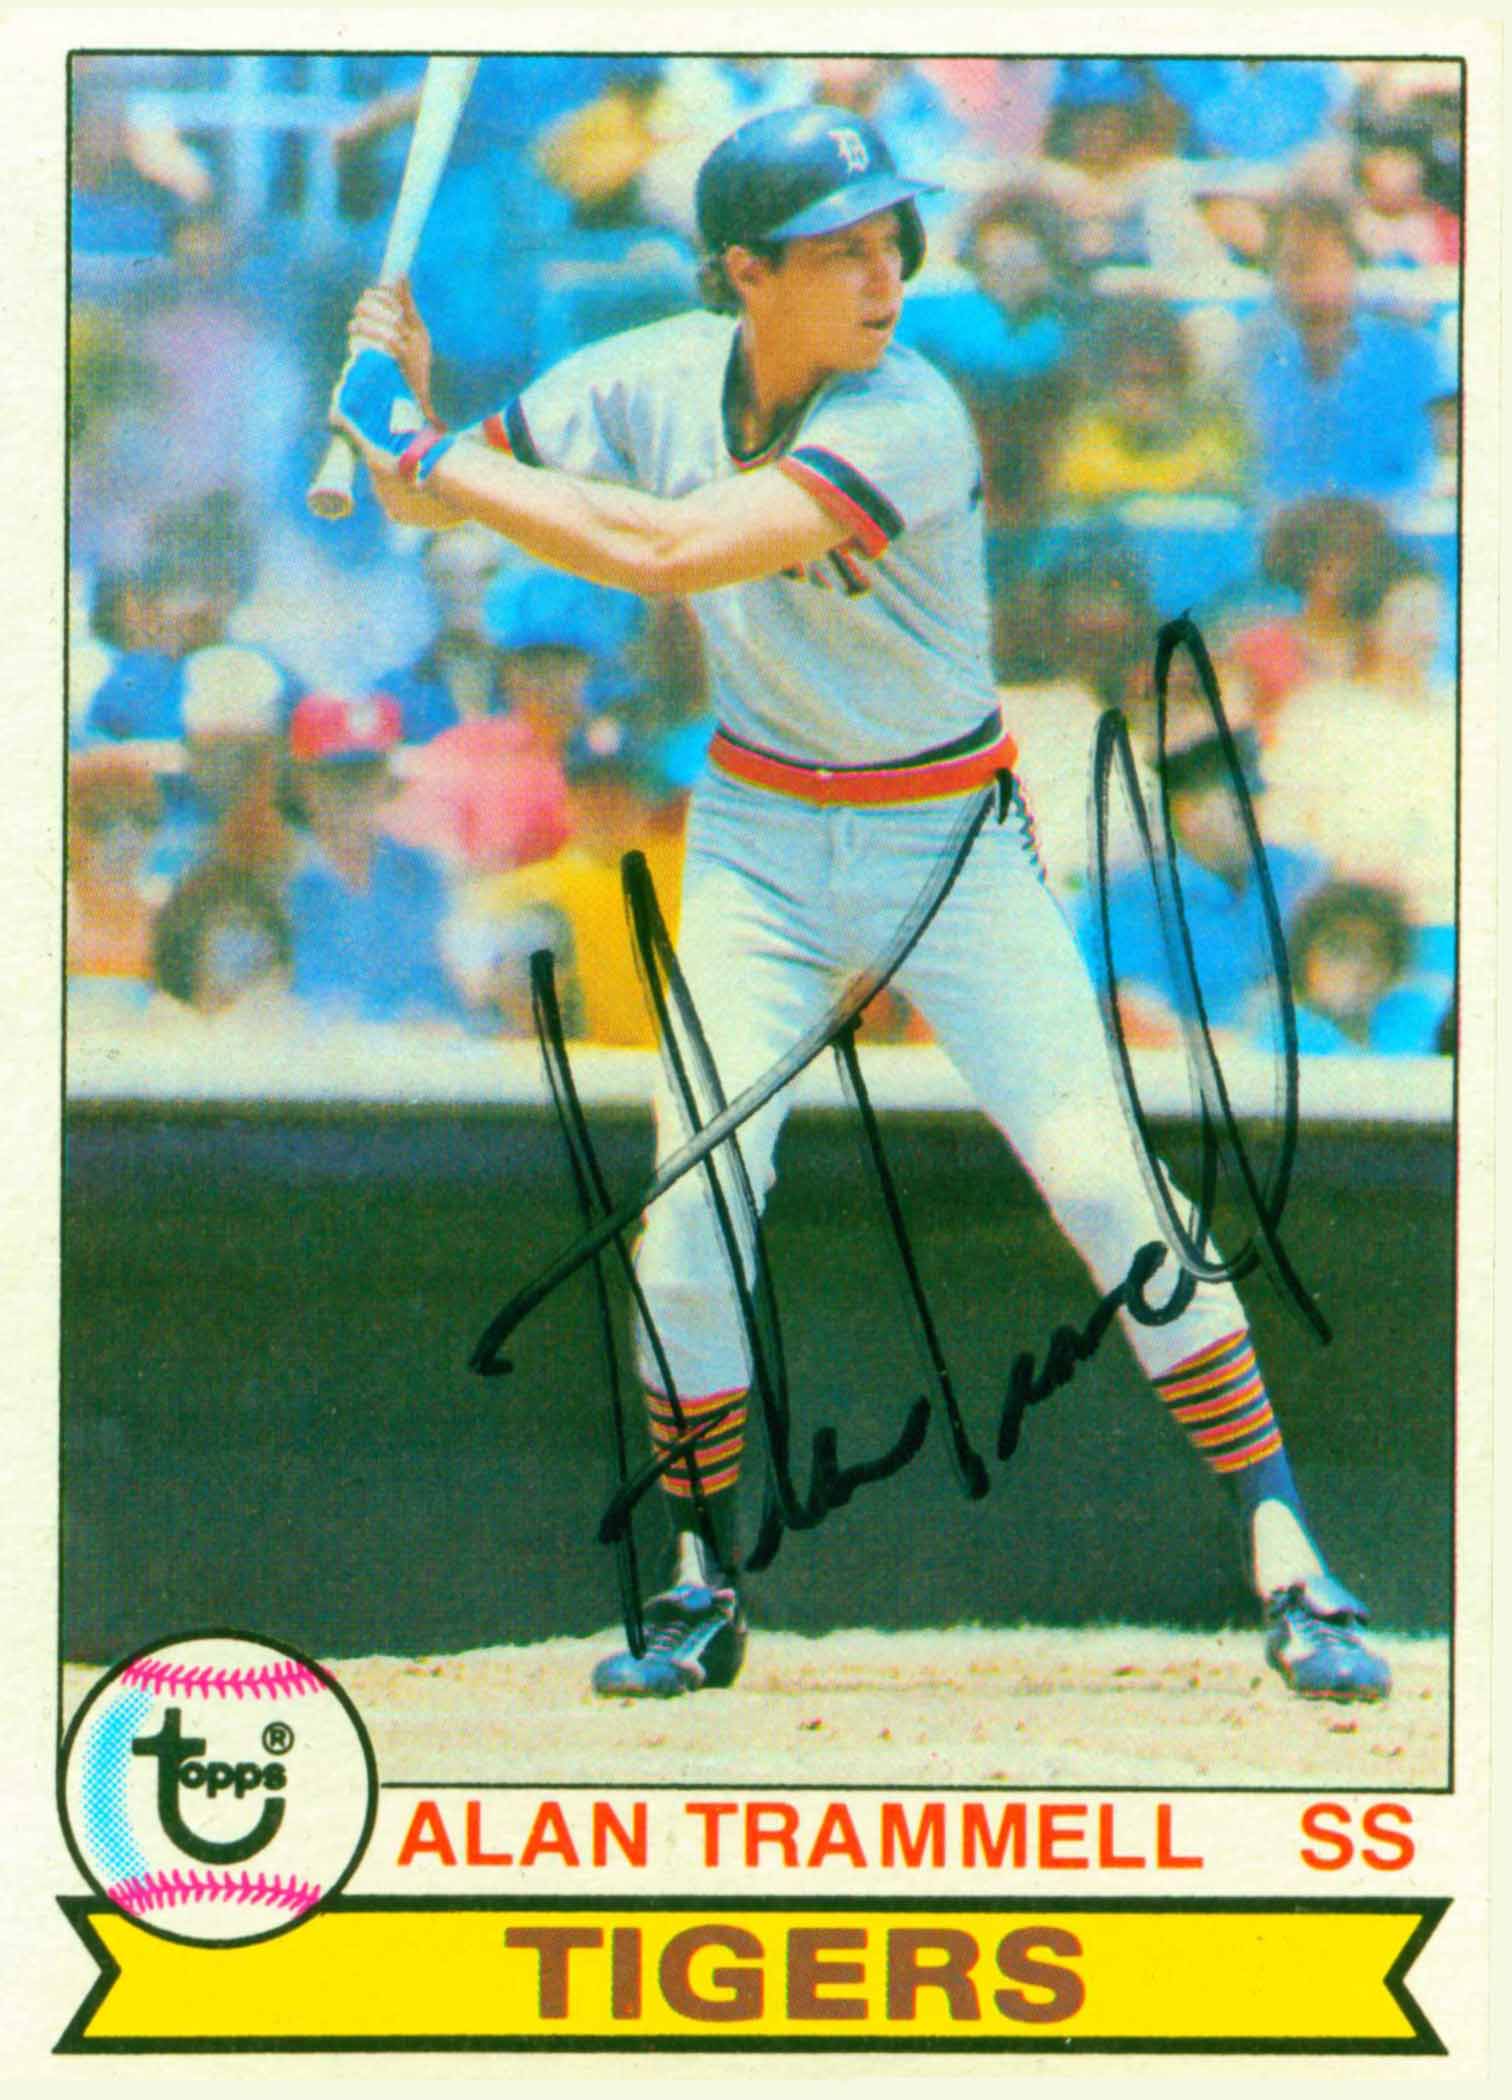 1979 Topps Autographed